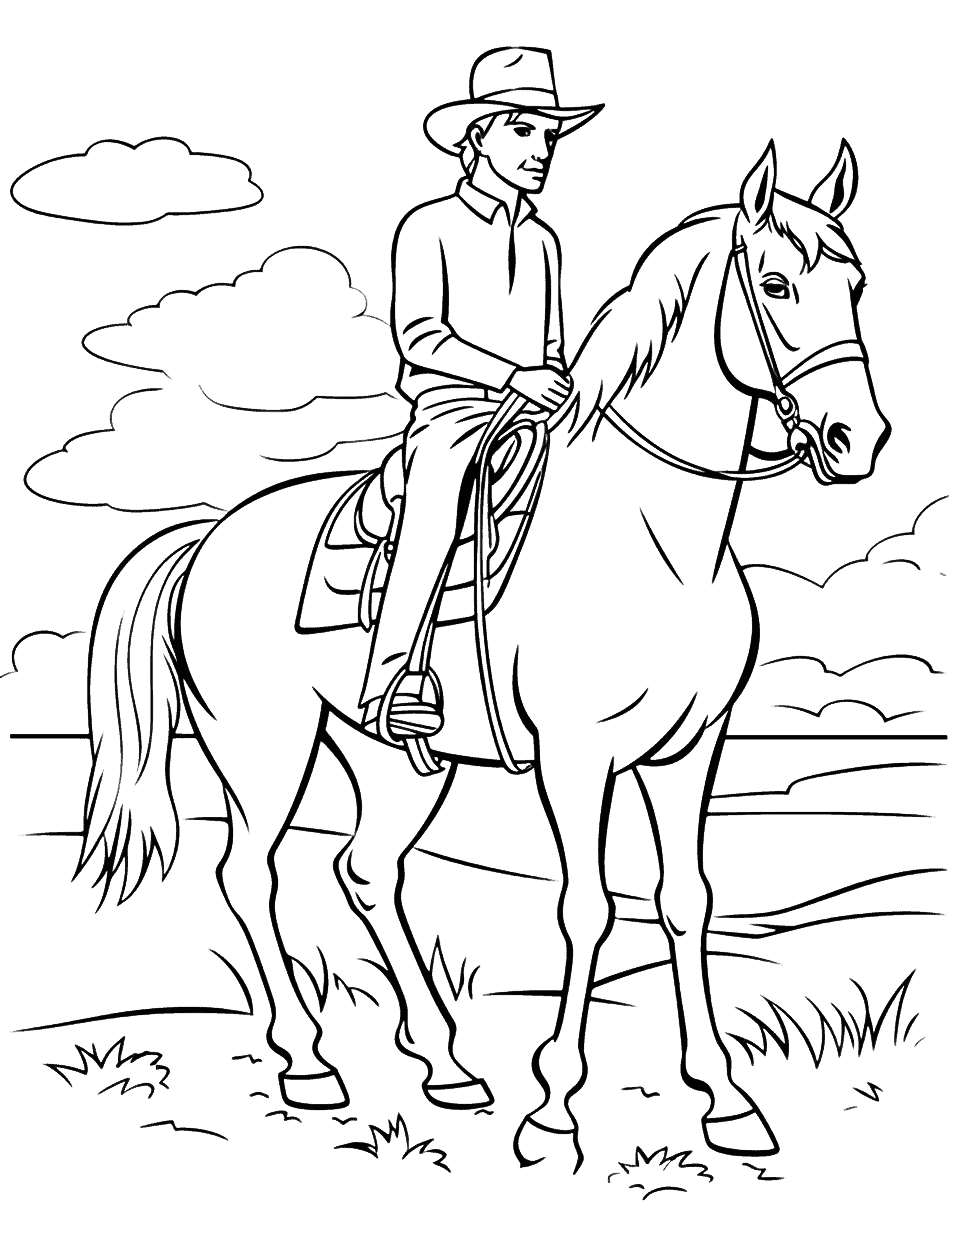 Western Horse and Cowboy Coloring Page - A cowboy riding his trusty horse in a western sunset scene.